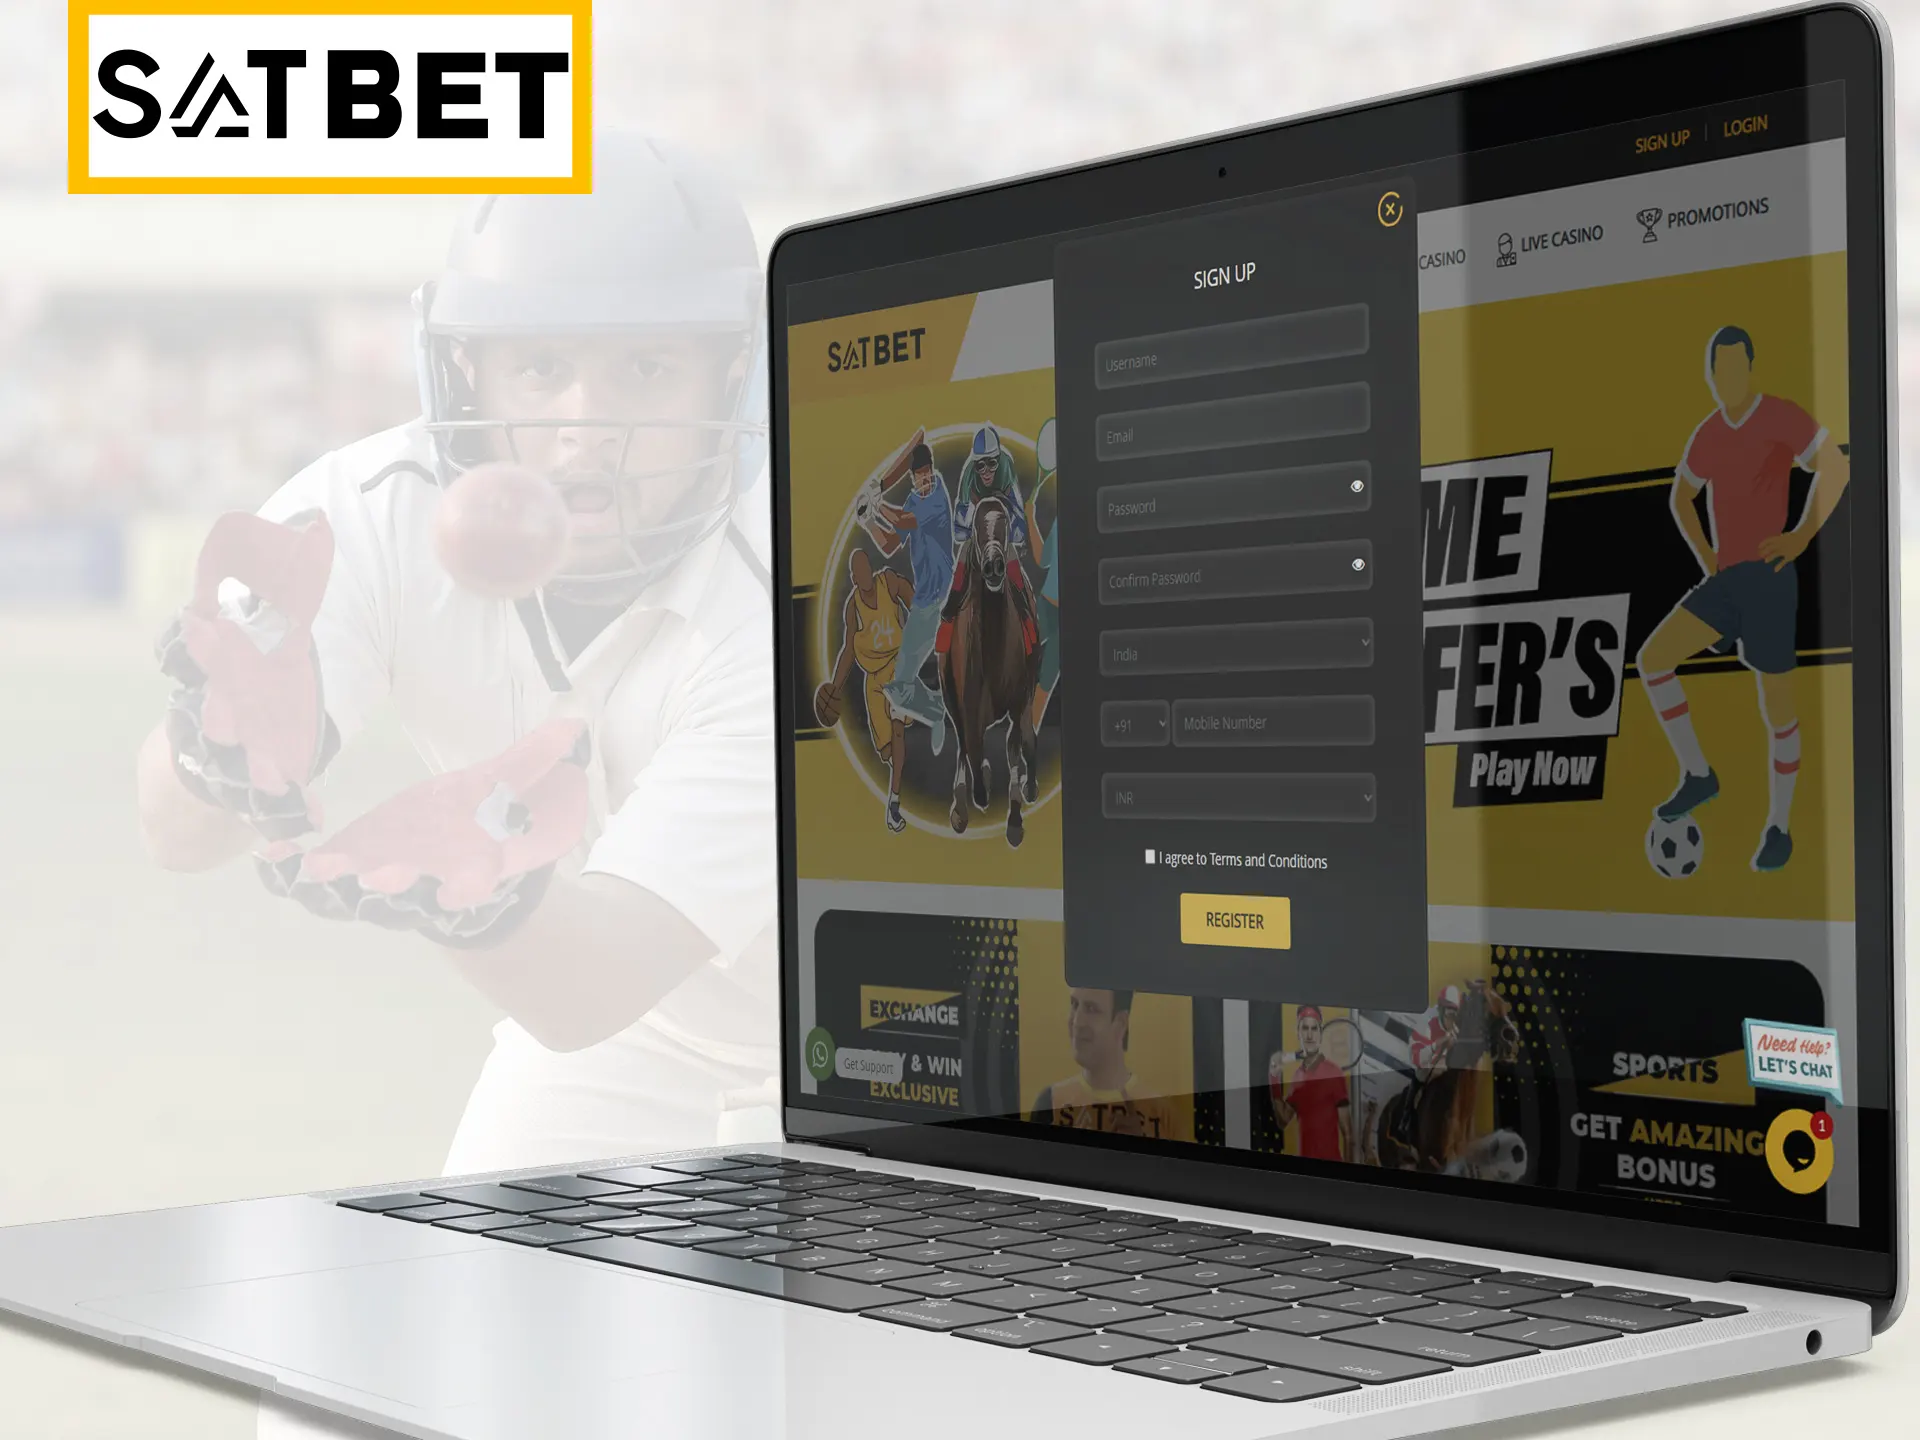 Make your own Satbet account.